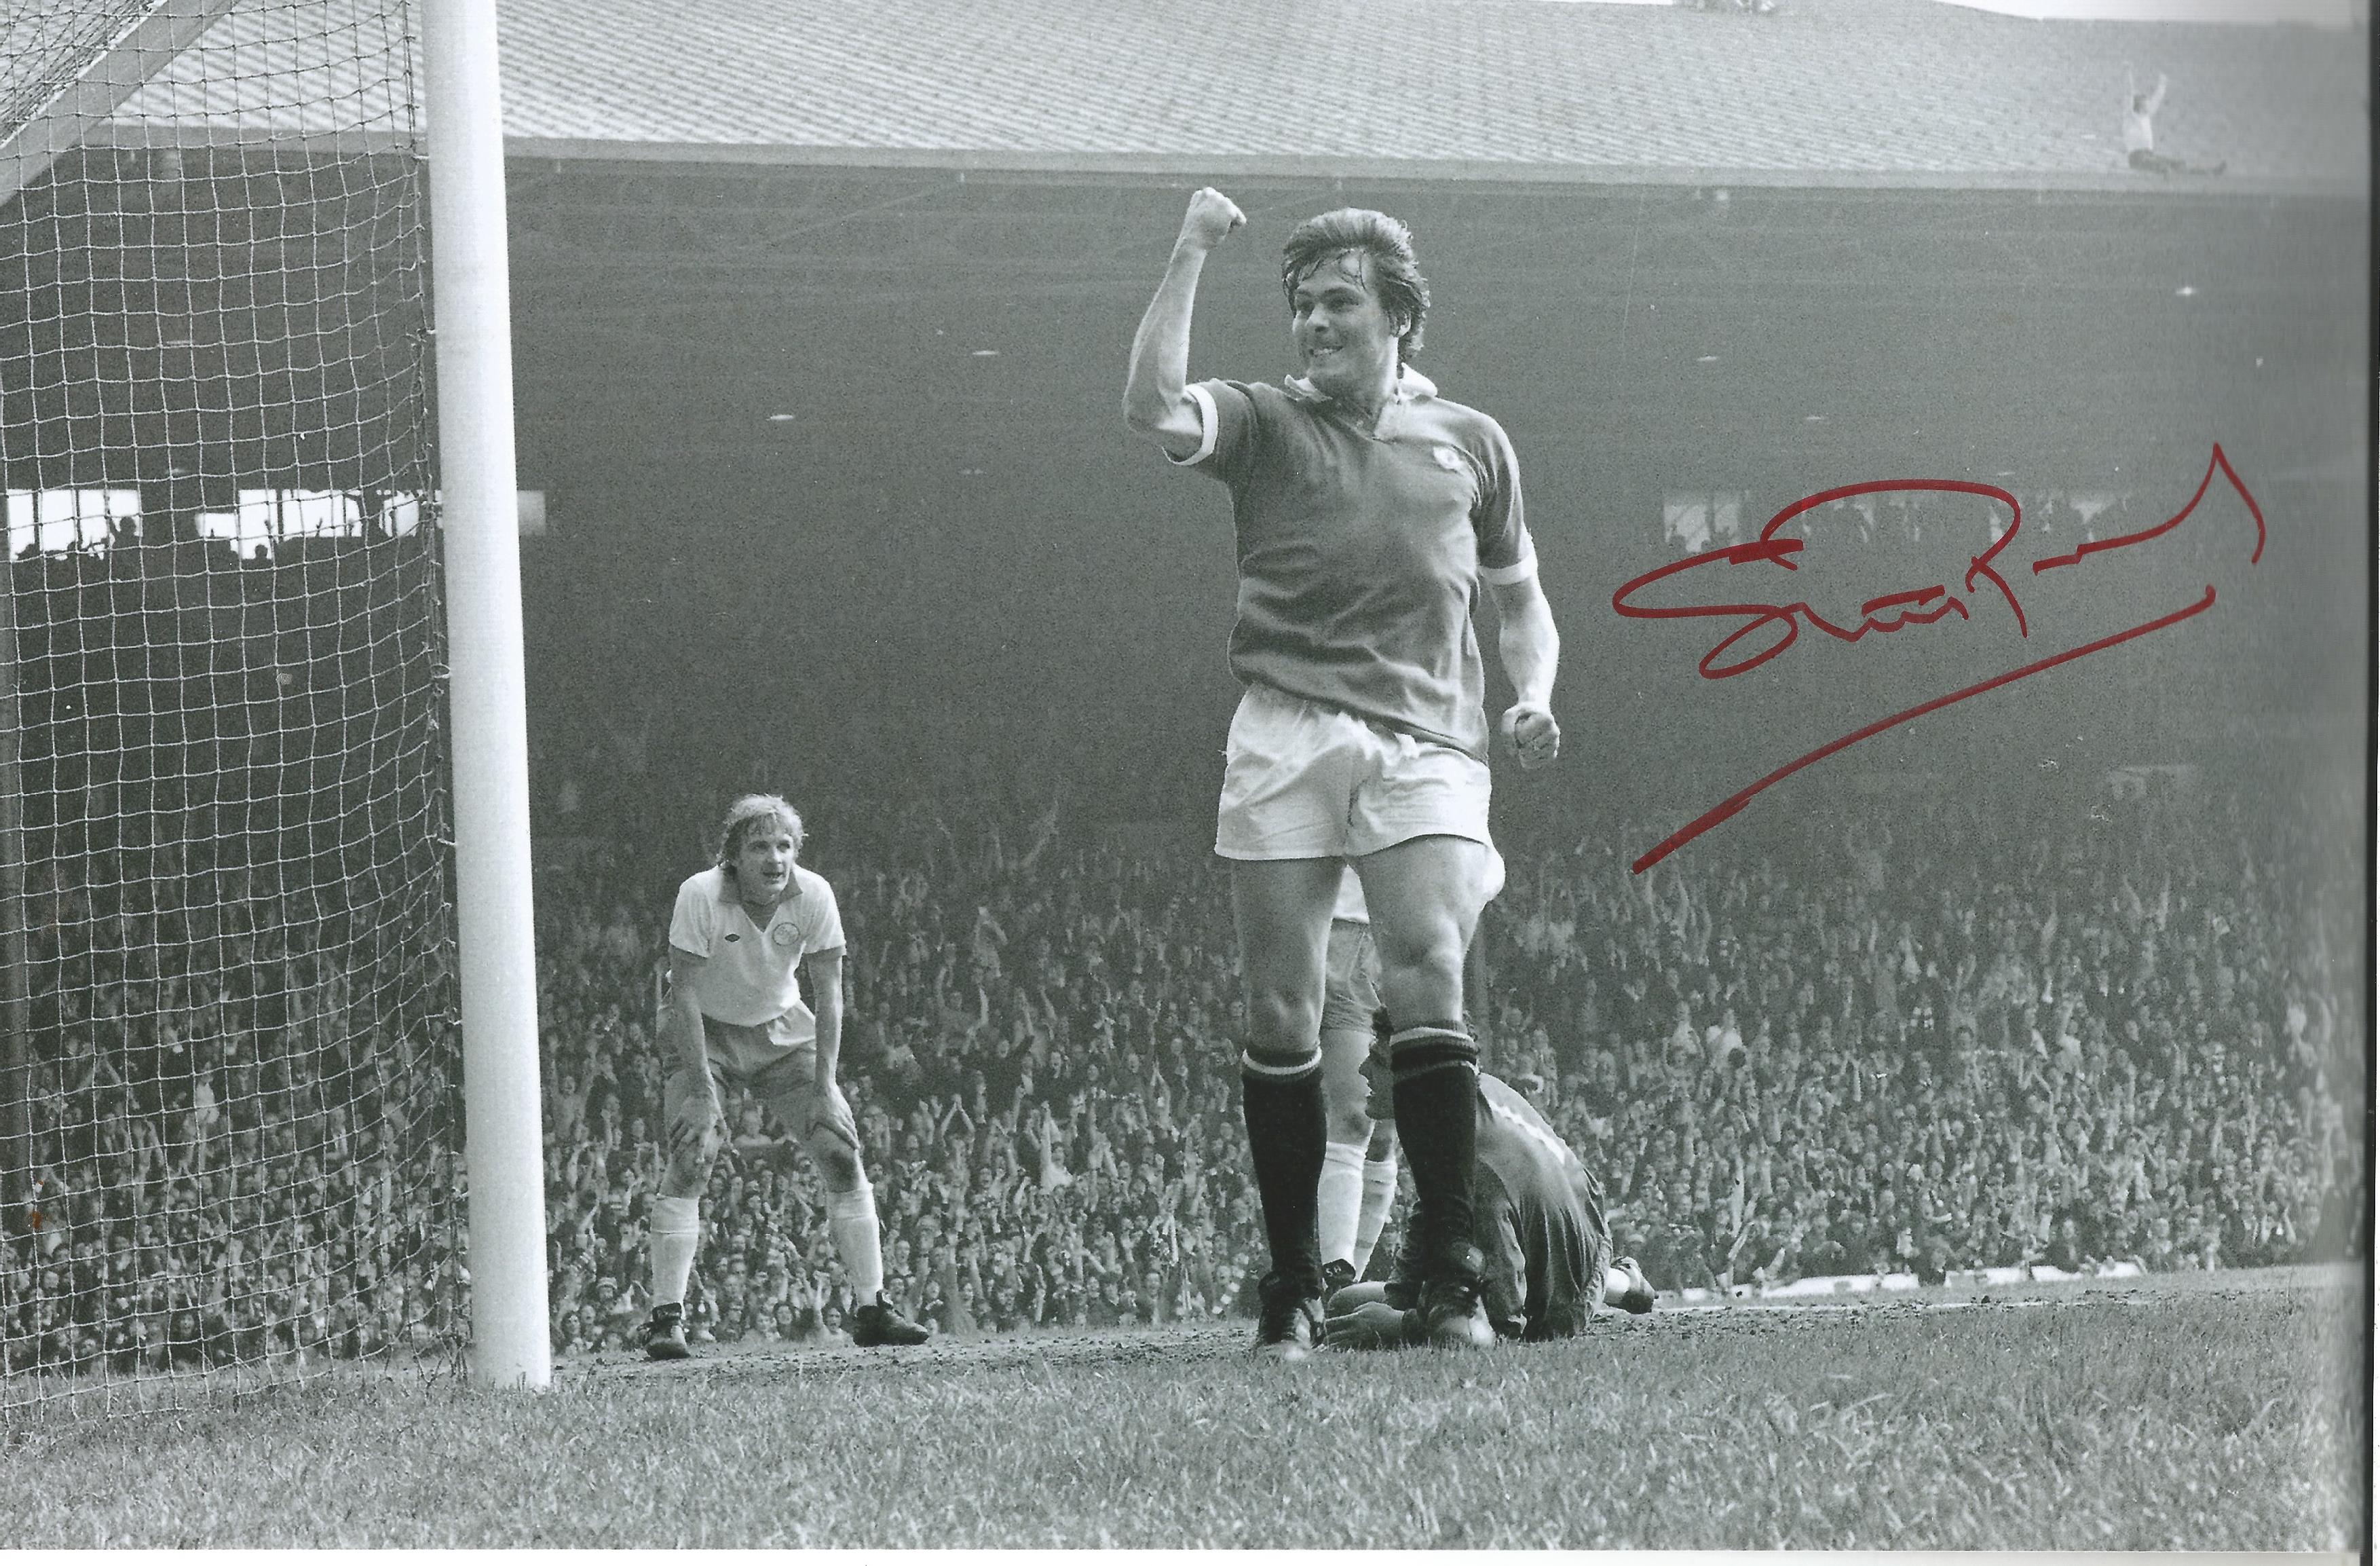 Stuart Pearson signed 12x8 black and white photo pictured celebrating while playing for Manchester